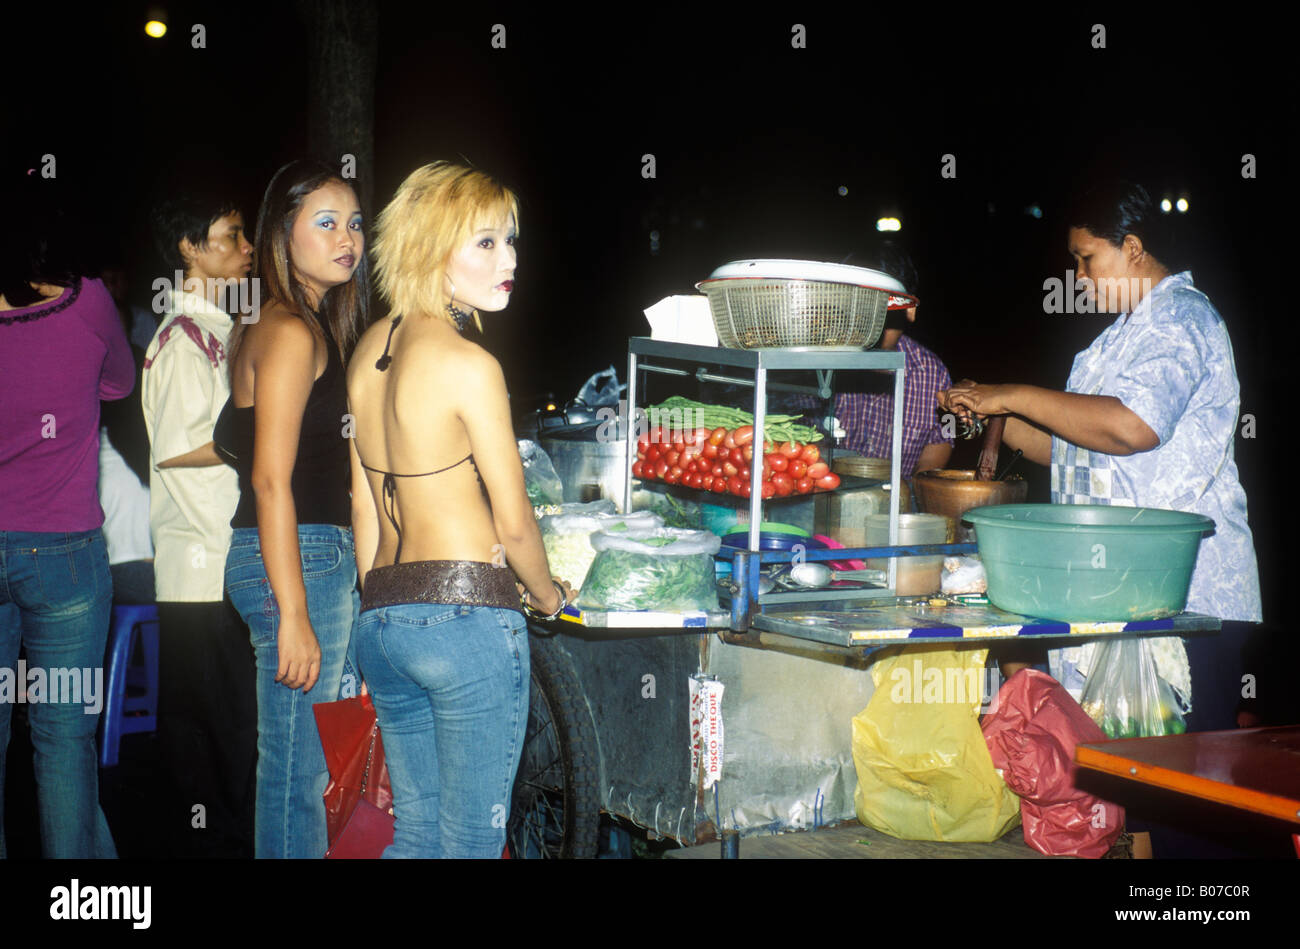 Young Thai People Buying Snack From Food Cart At Night Bangkok Thailand Stock Photo